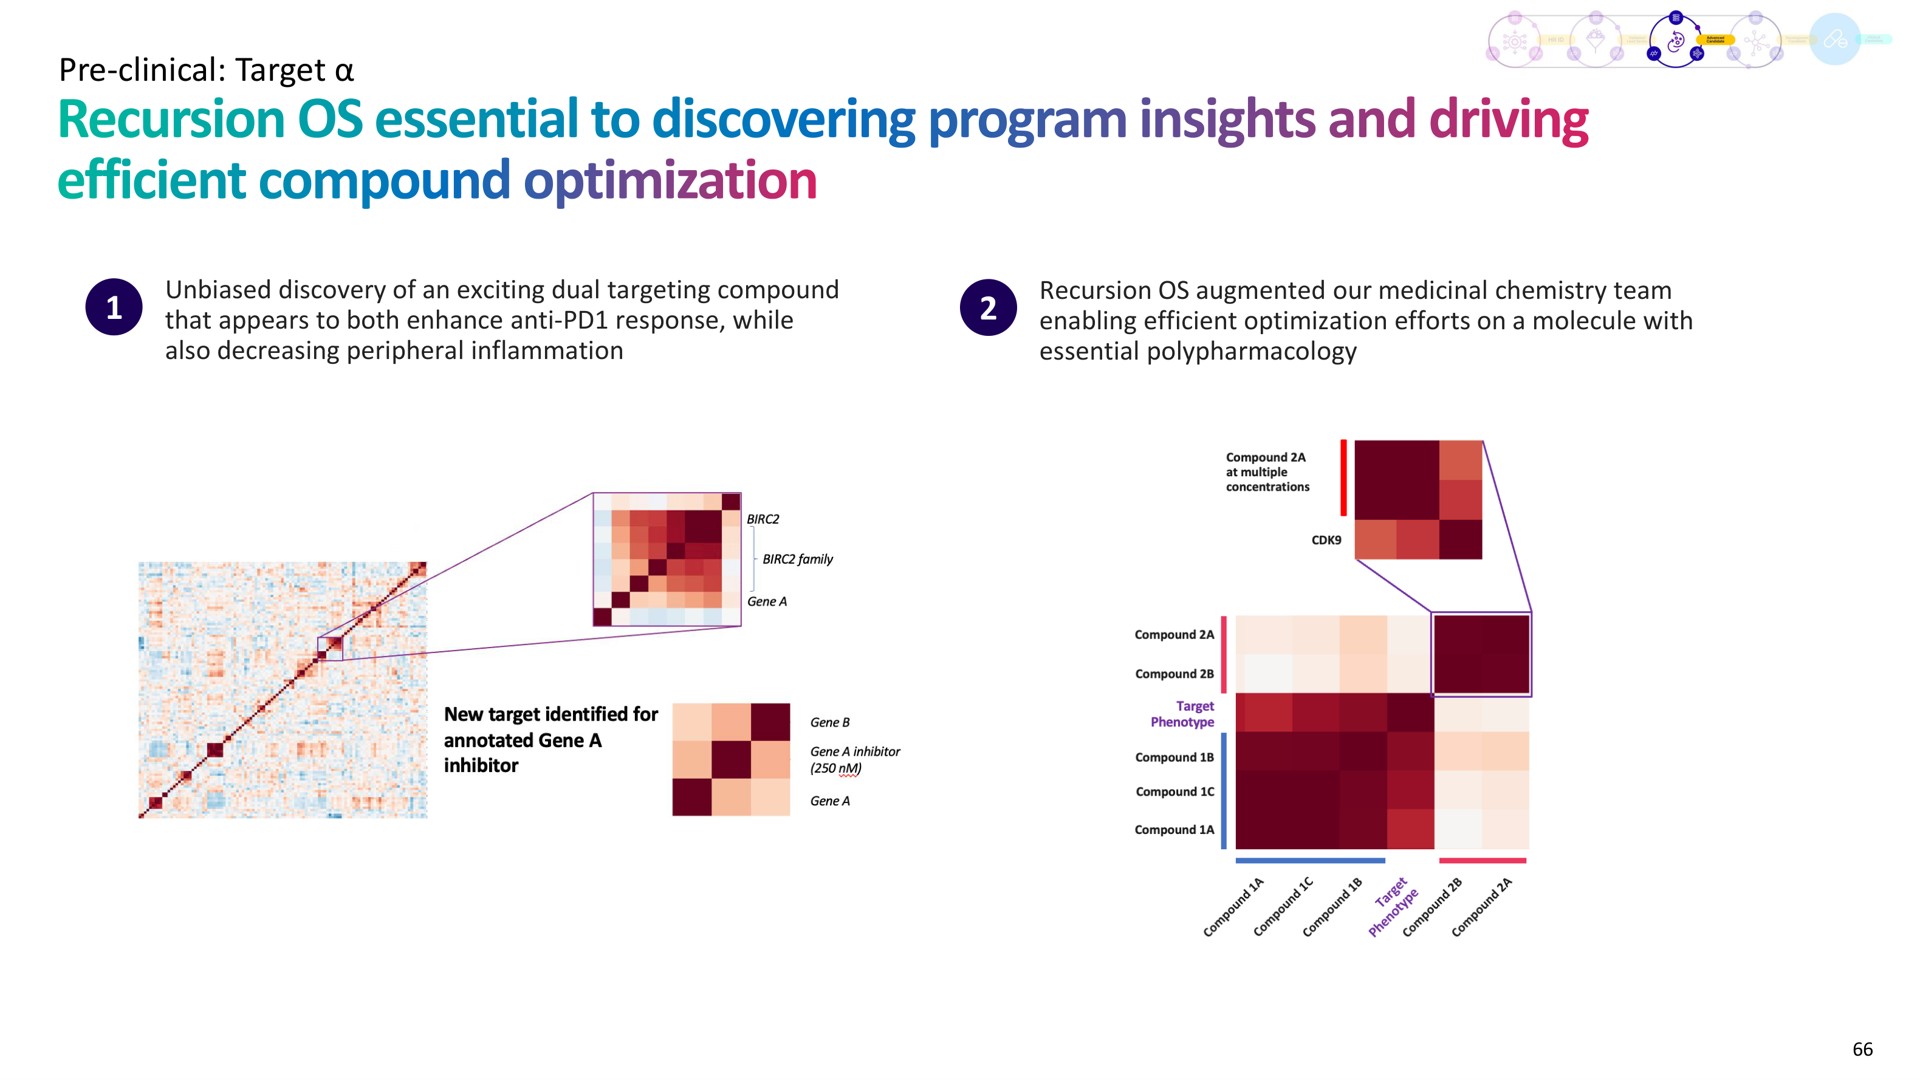 clinical target recursion essential to discovering program insights and driving efficient compound optimization | Recursion Pharmaceuticals